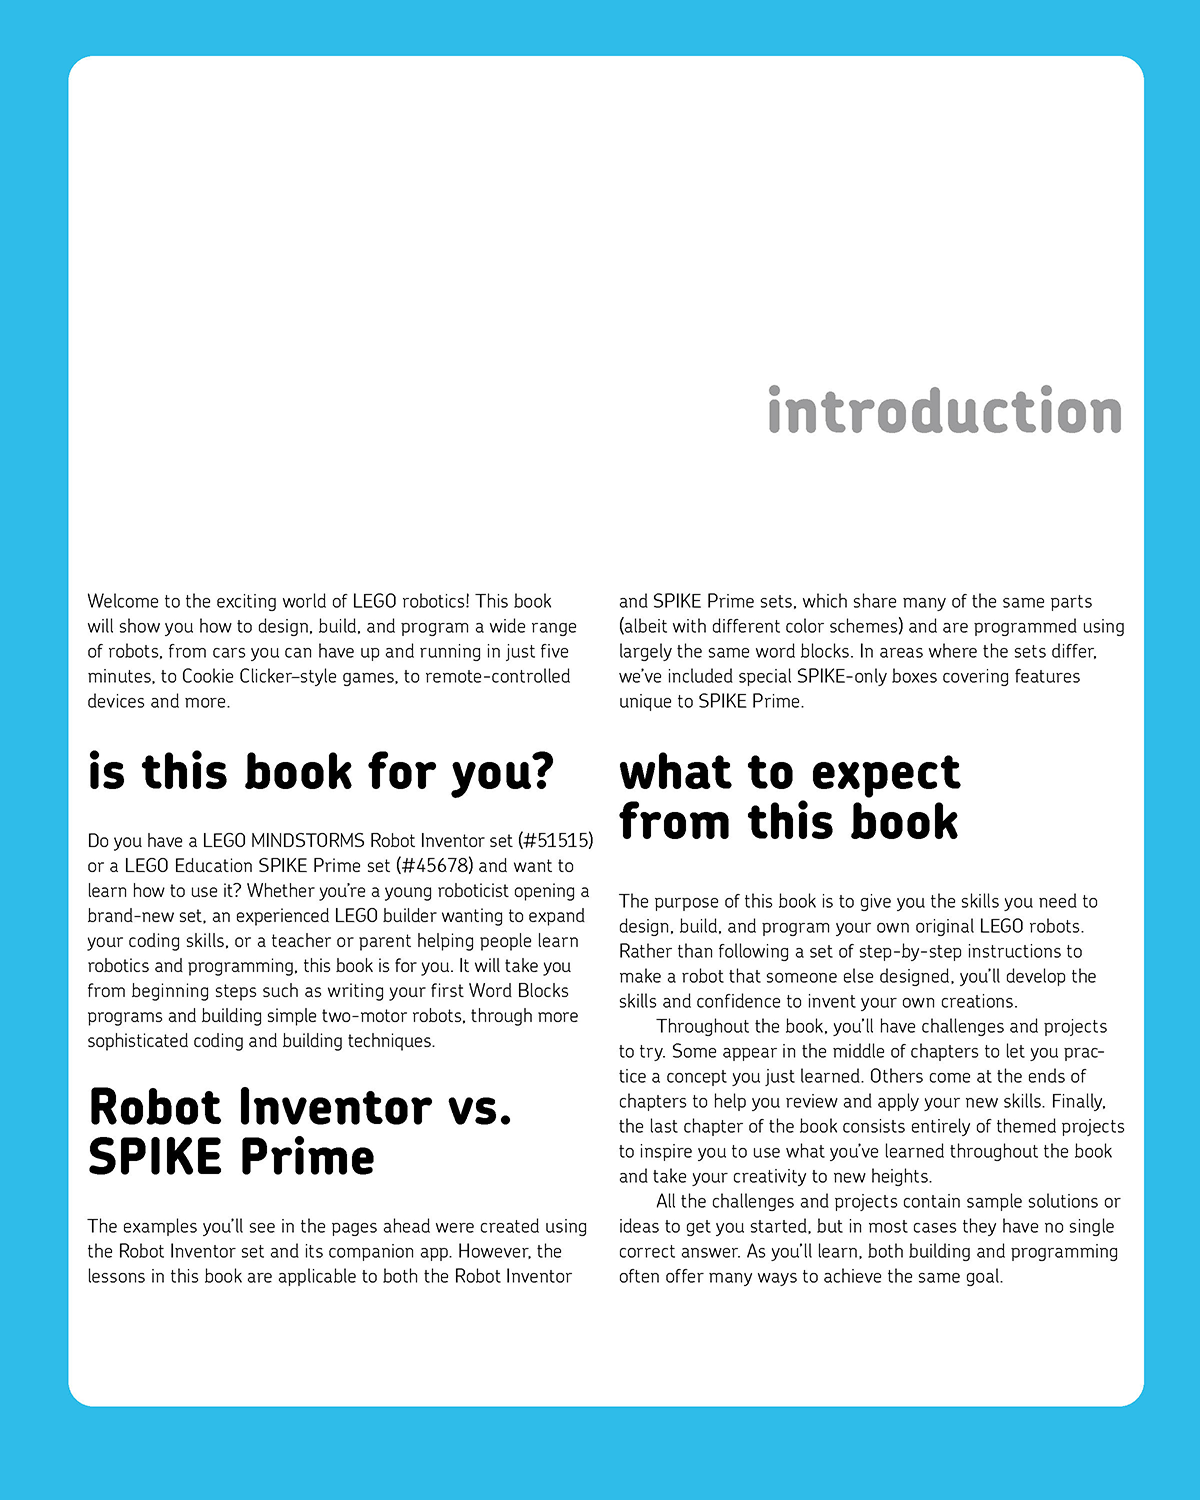 Getting started with LEGO robotics a Mindstorms user guide - photo 16